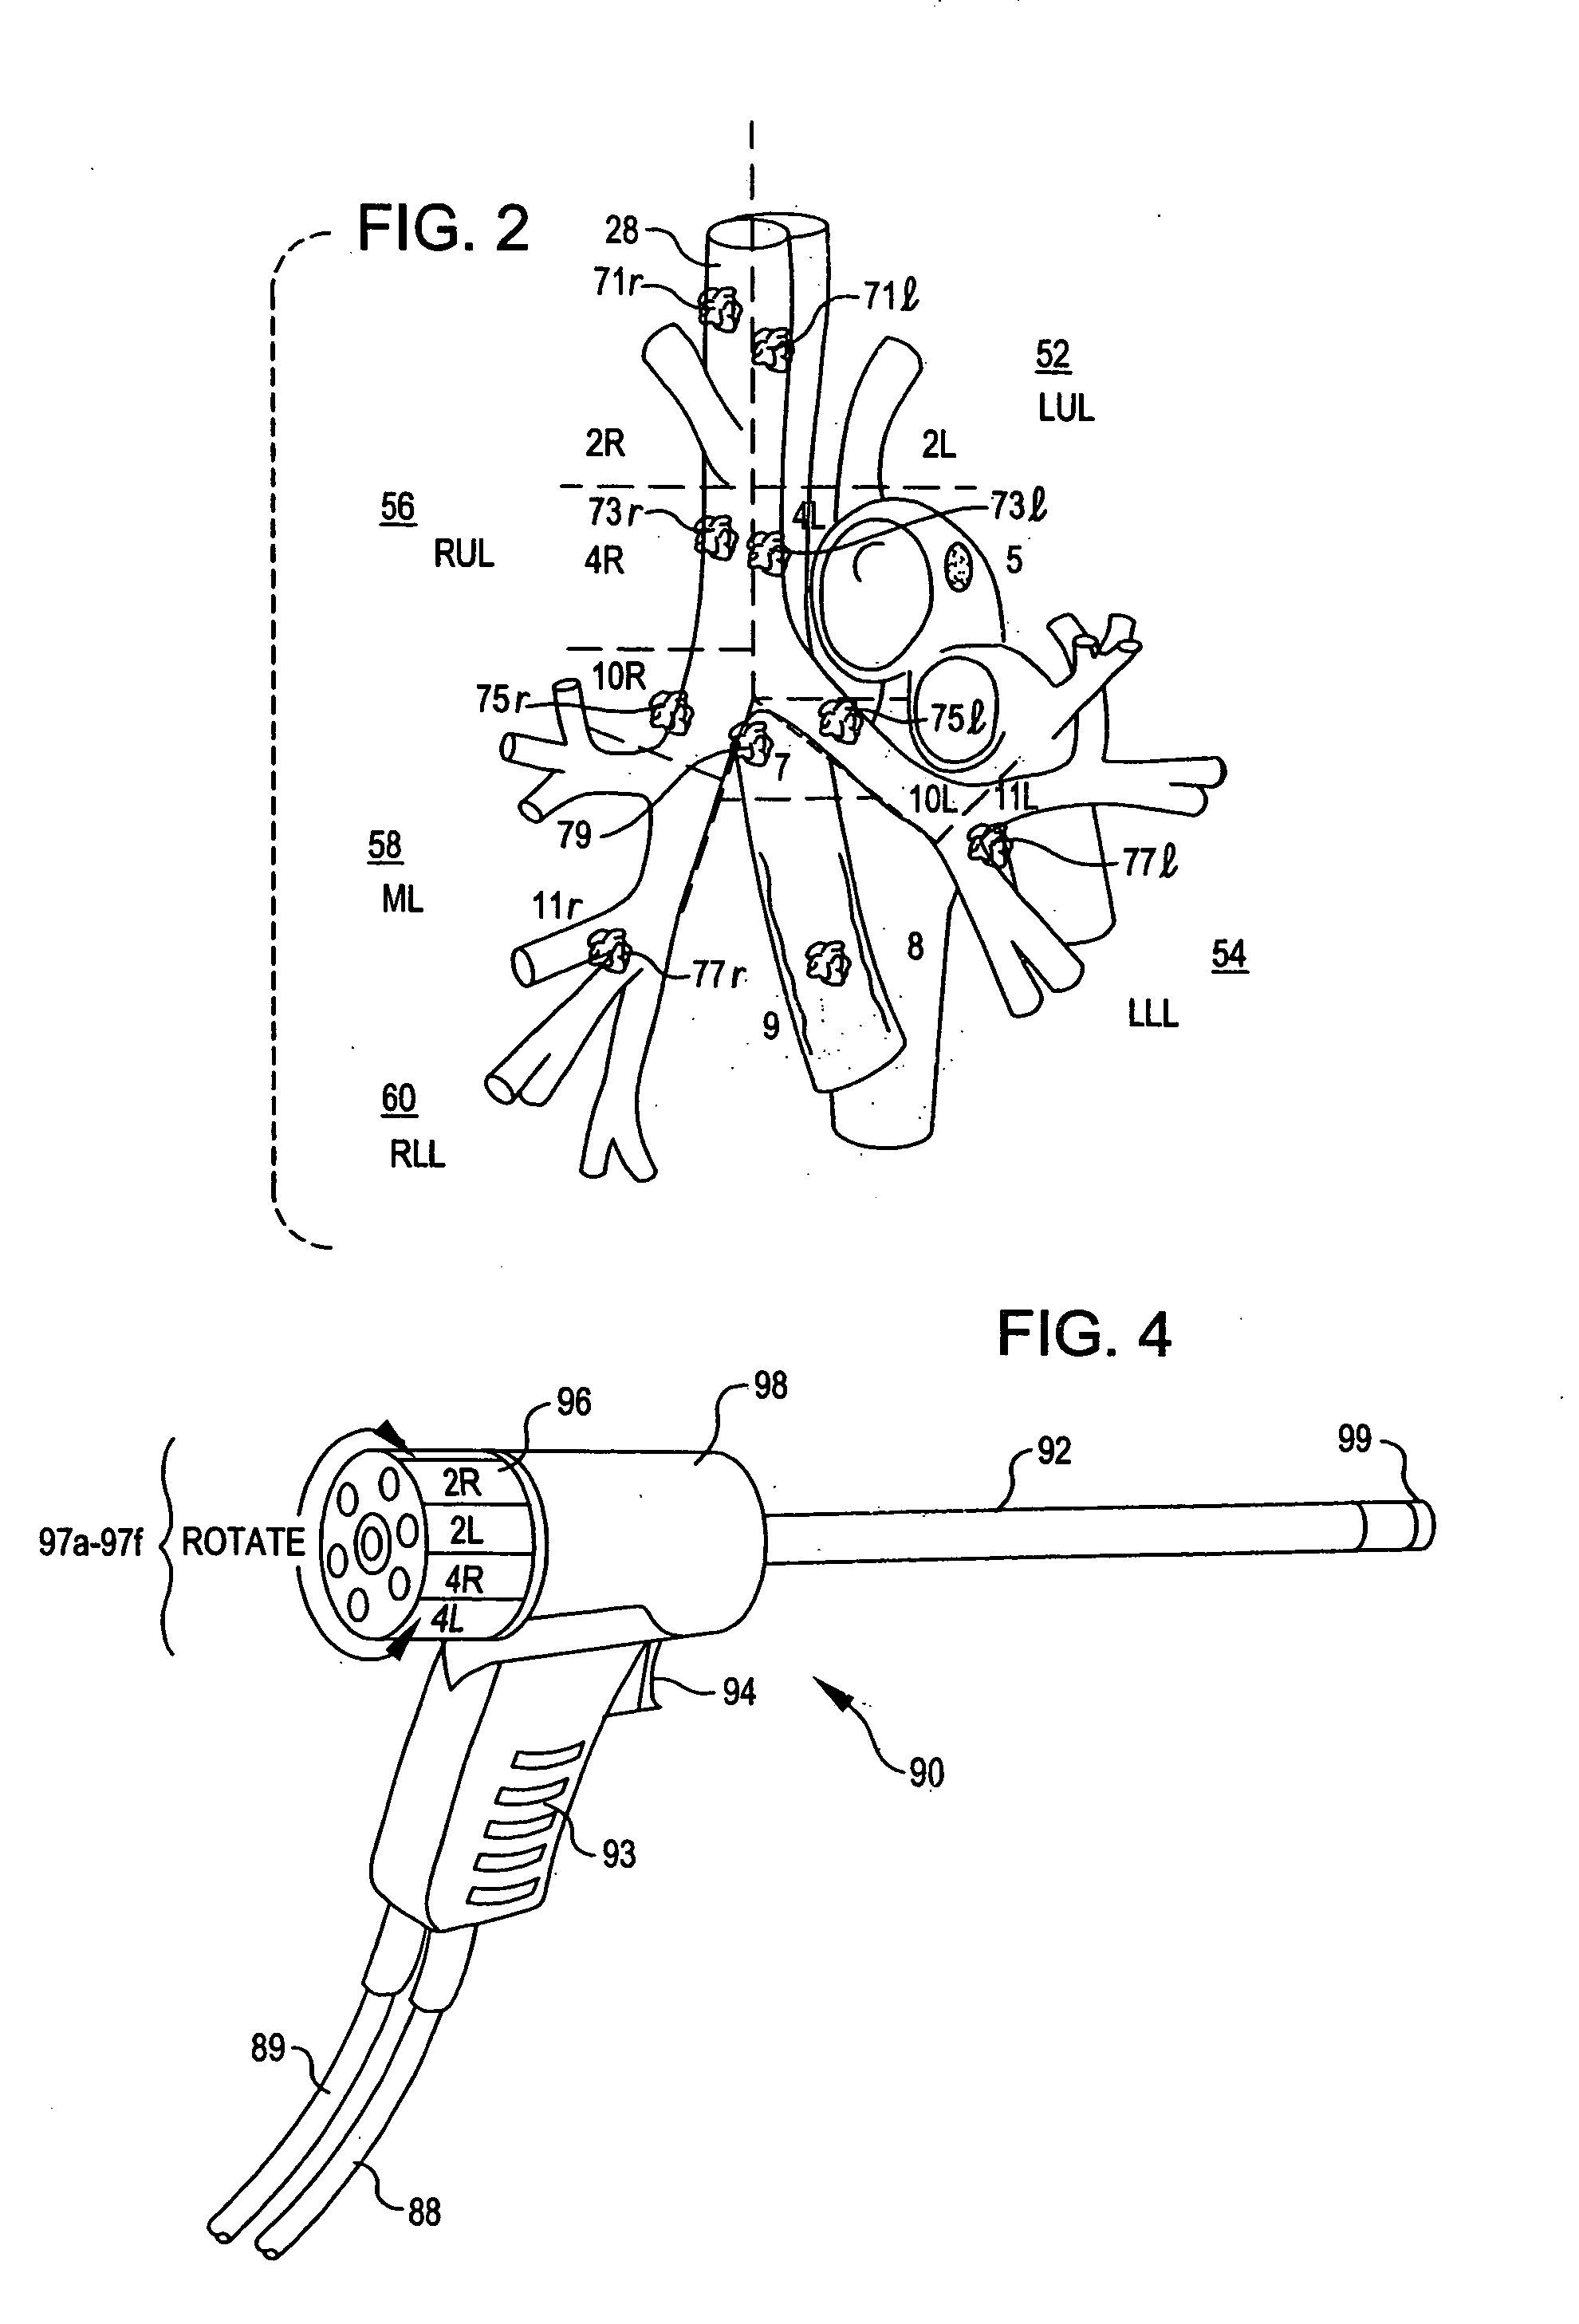 Apparatus and method for resecting and removing selected body tissue from a site inside a patient